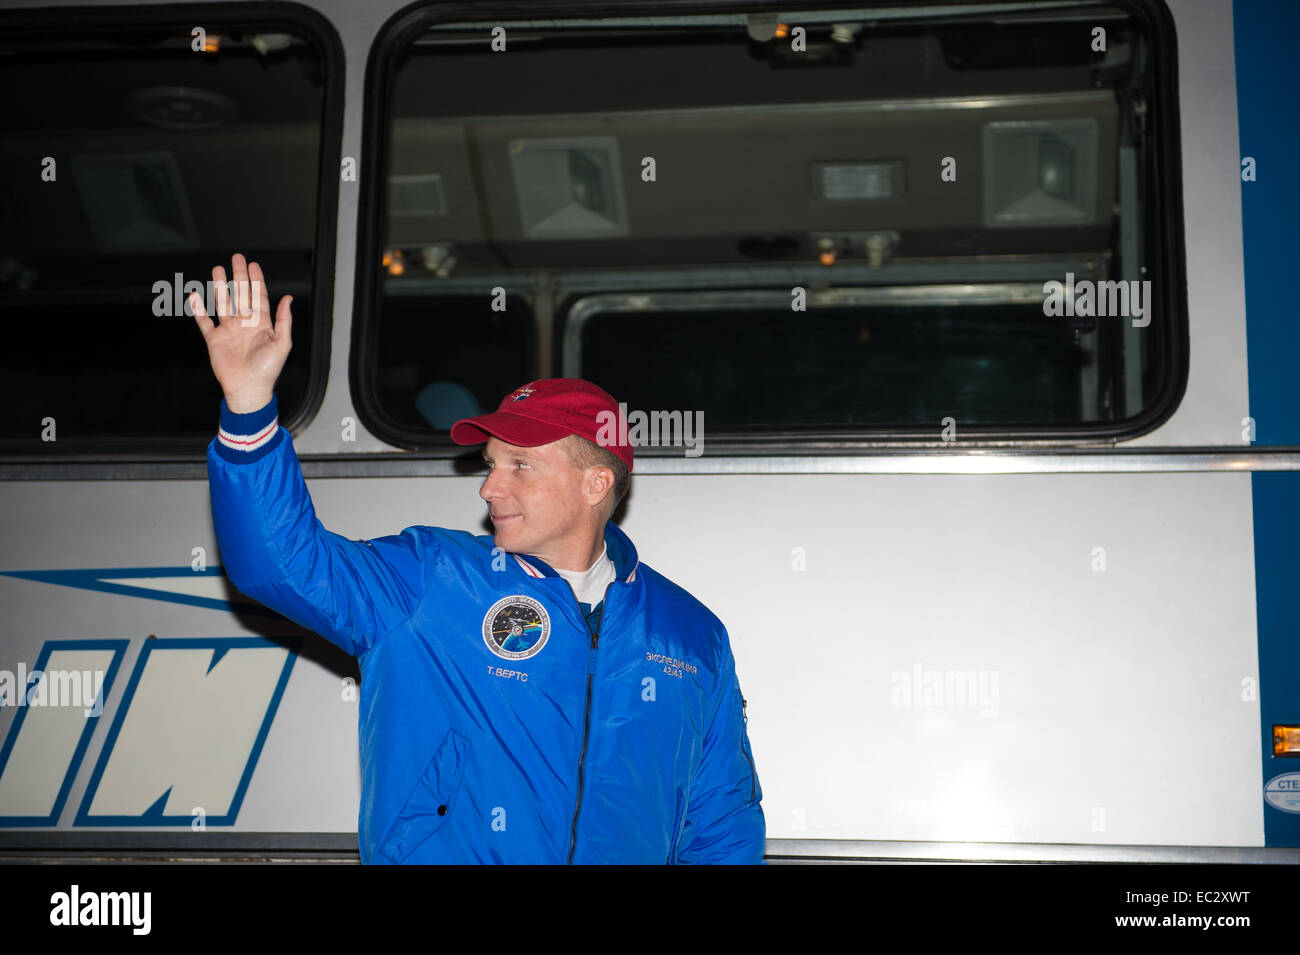 Expedition 42 Flight Engineer Terry Virts of NASA, waves farewell to family and friends as he departs the Cosmonaut Hotel to suit up for the Soyuz launch to the International Space Station on Sunday, Nov. 23, 2014, in Baikonur, Kazakhstan. Launch of the Soyuz rocket is scheduled for the early hours of Nov. 24 and will send Virts, Soyuz Commander Anton Shkaplerov of the Russian Federal Space Agency (Roscosmos), and Flight Engineer Samantha Cristoforetti of the European Space Agency (ESA) on a five and a half month mission aboard the International Space Station. Stock Photo